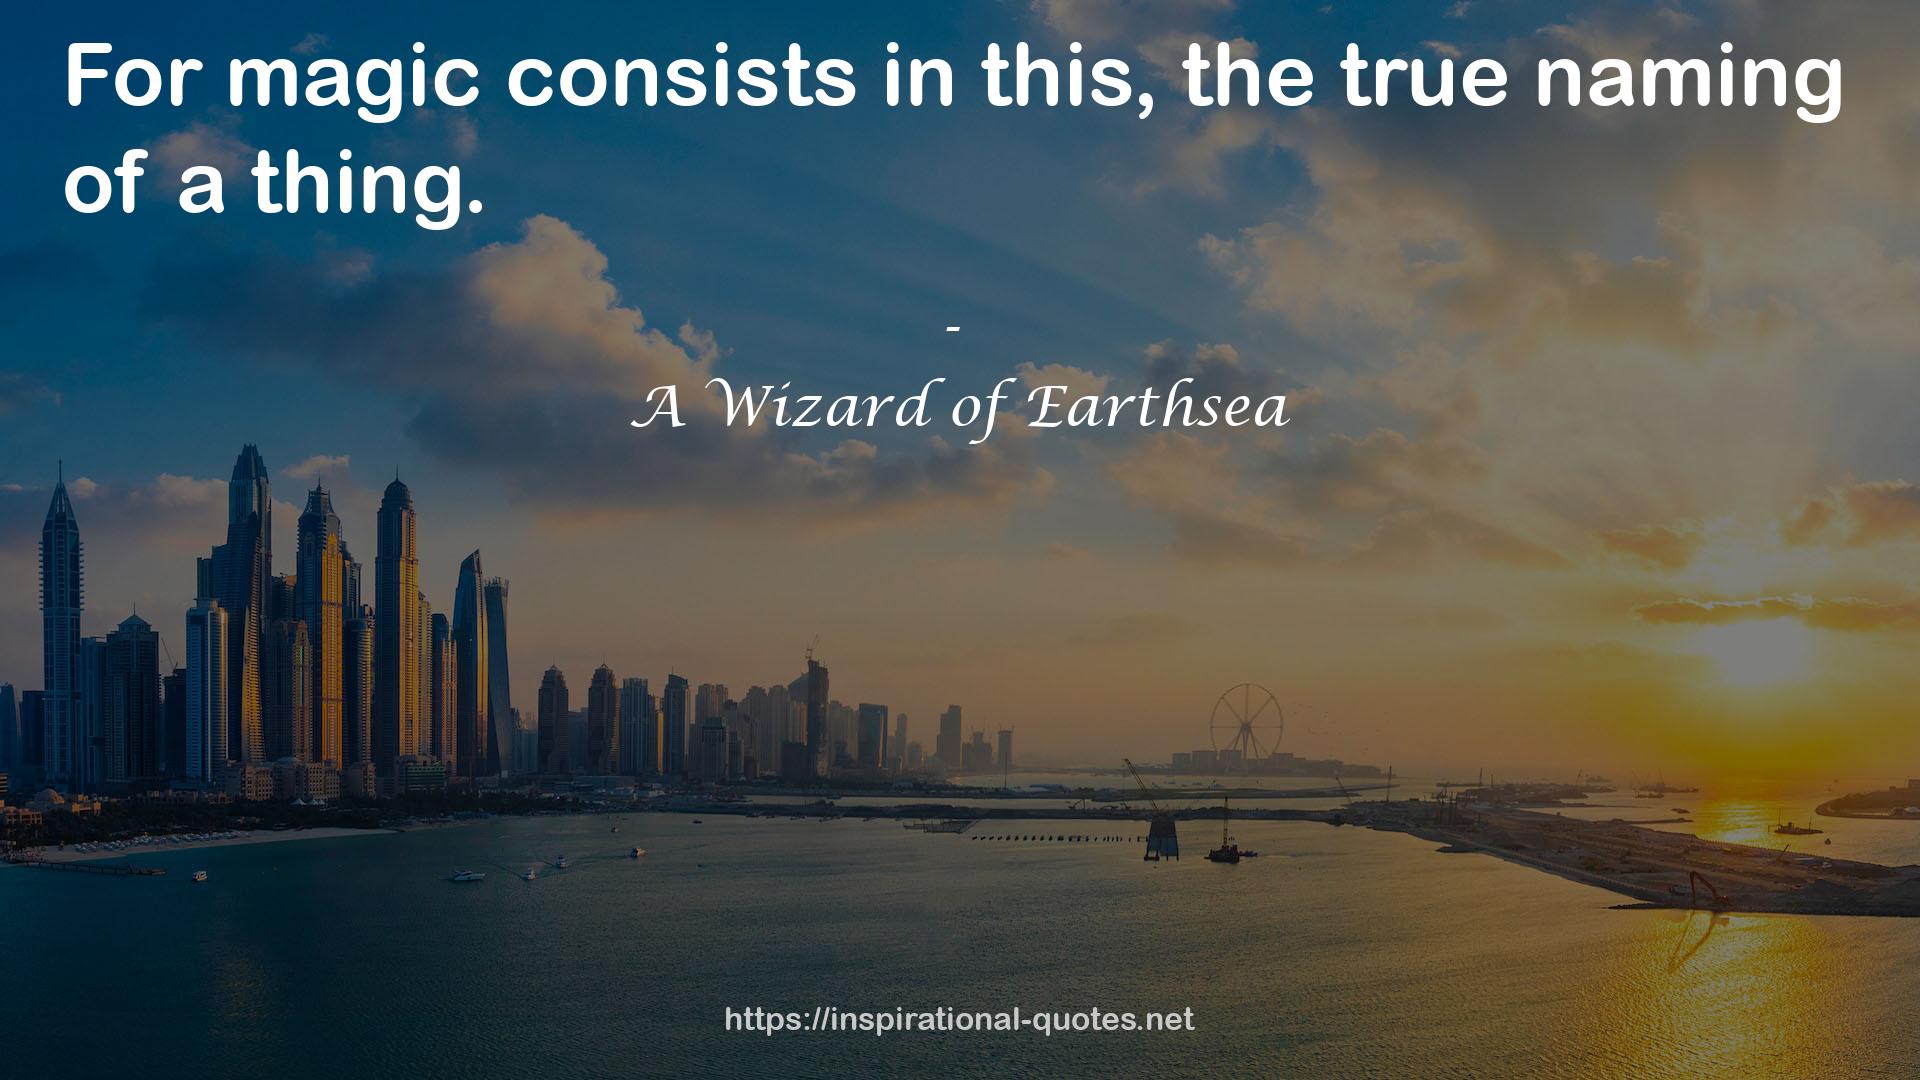 A Wizard of Earthsea QUOTES